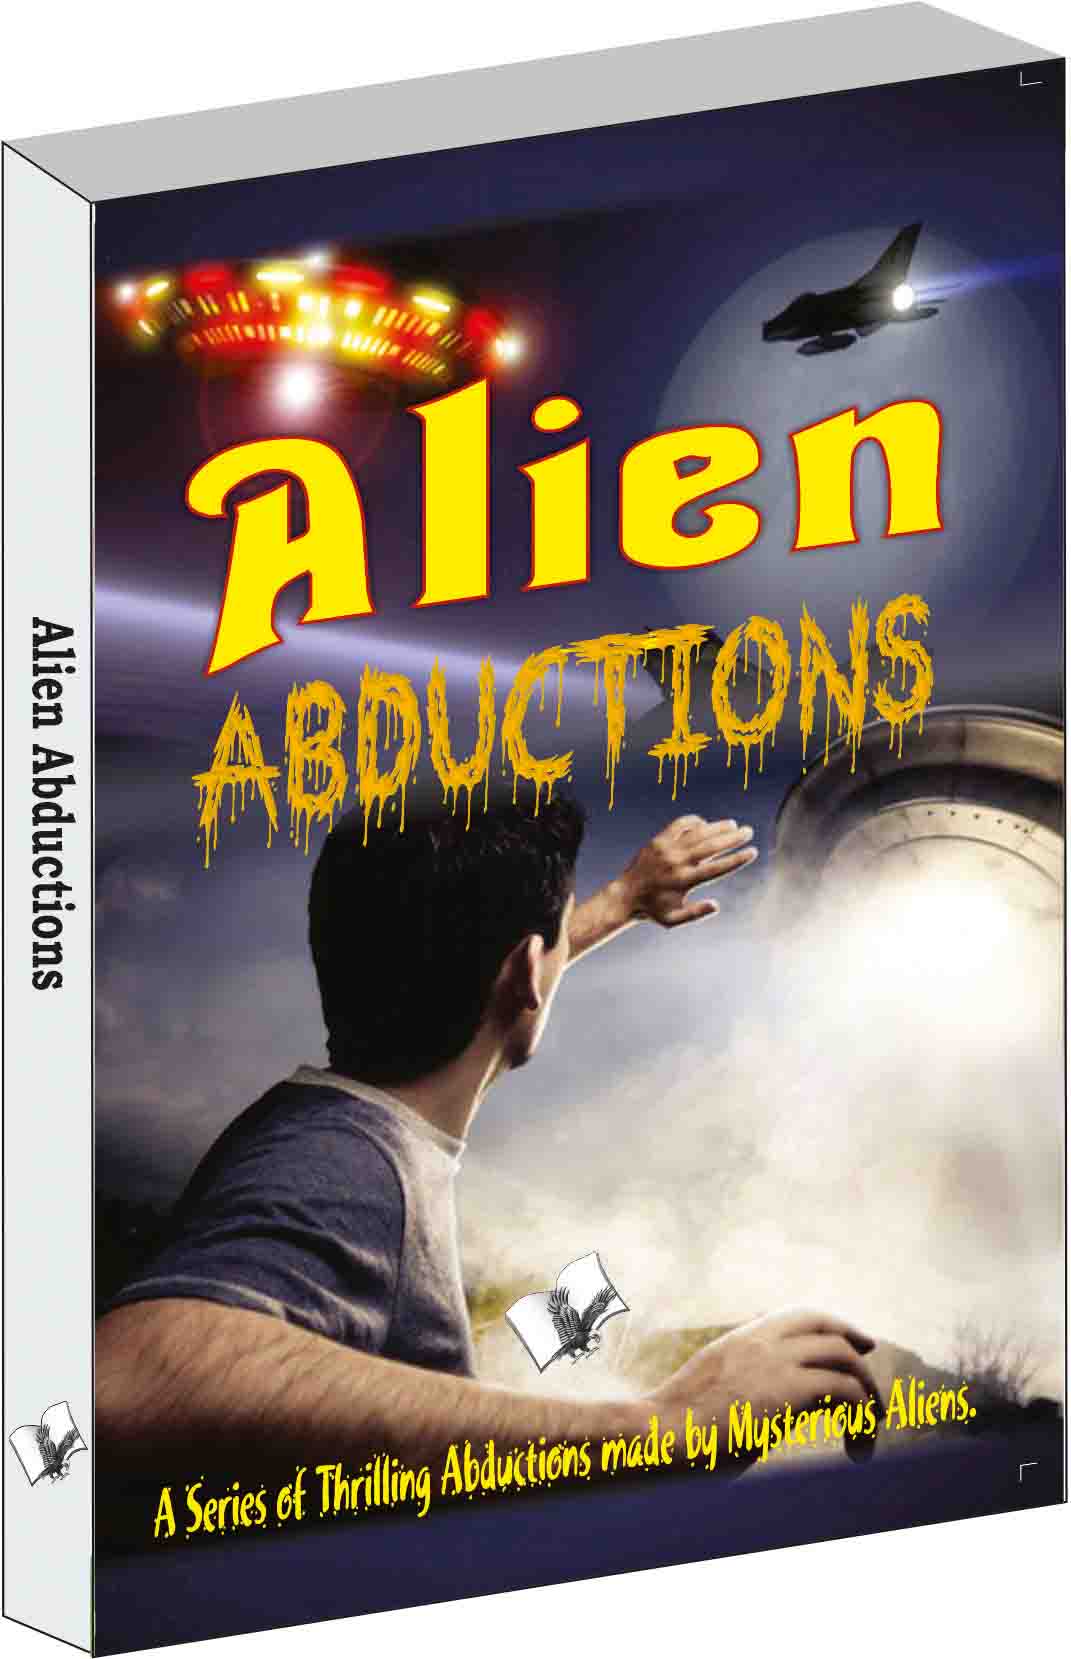 Alien Abductions-A Series of Thrilling Abductions made by Mysterious Aliens.